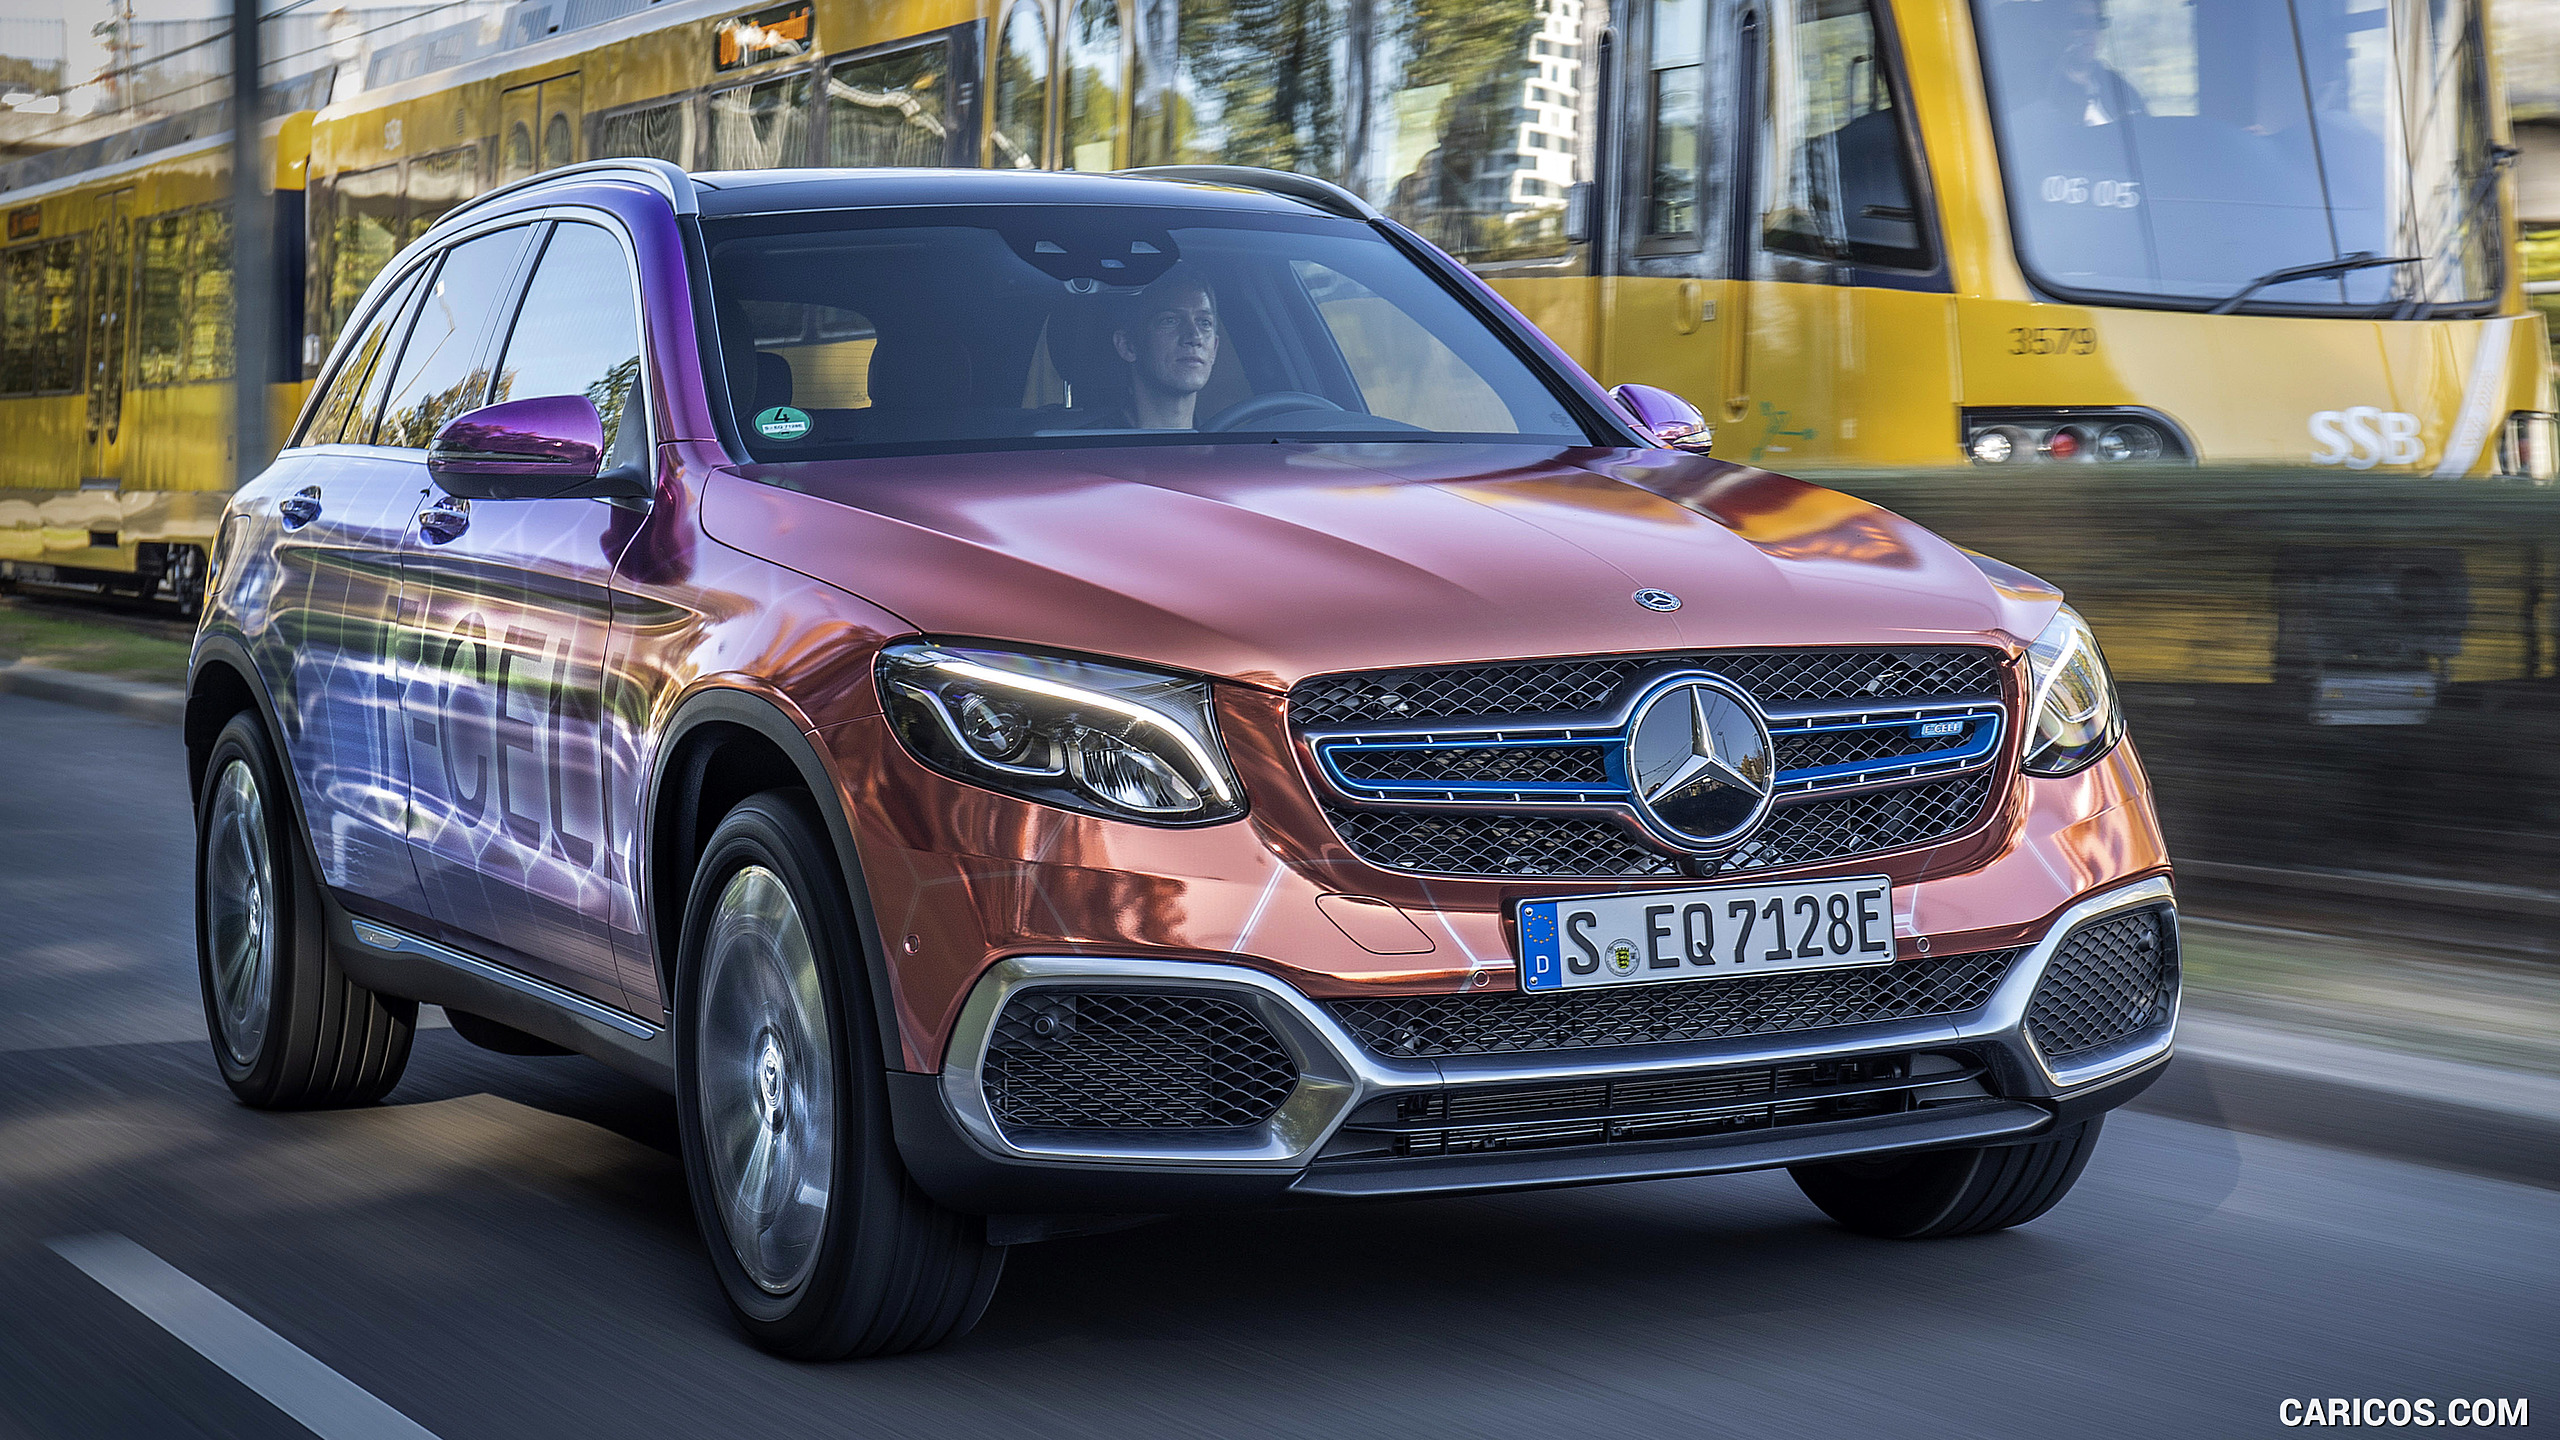 2019 Mercedes-Benz GLC F-CELL - Front, #55 of 95